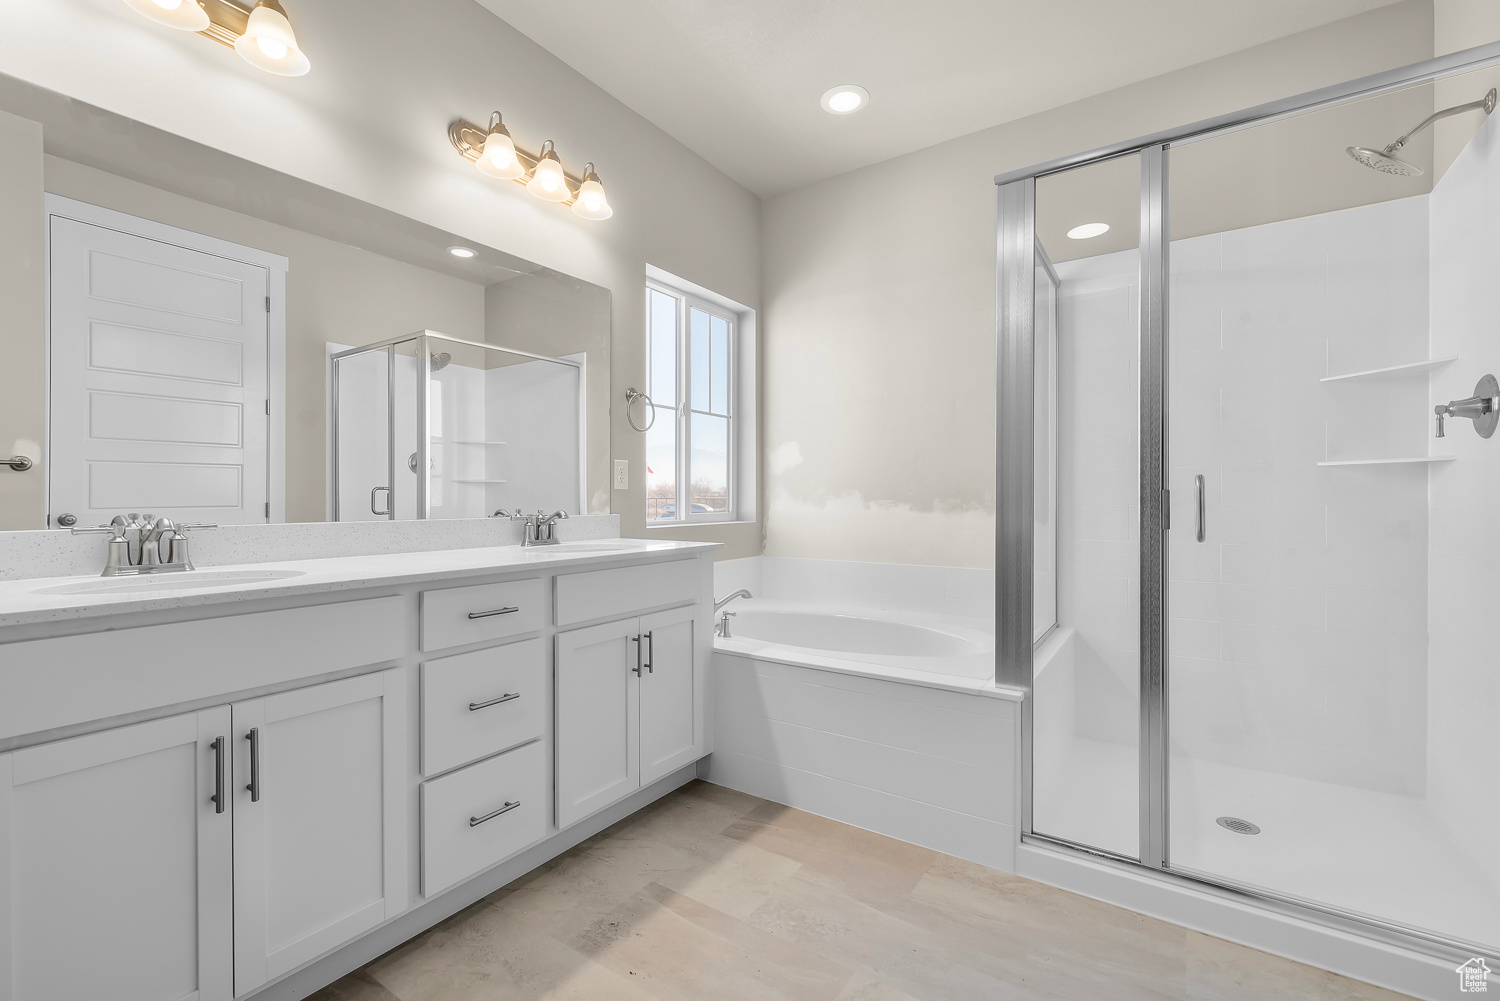 Bathroom with independent shower and bath, oversized vanity, and double sink